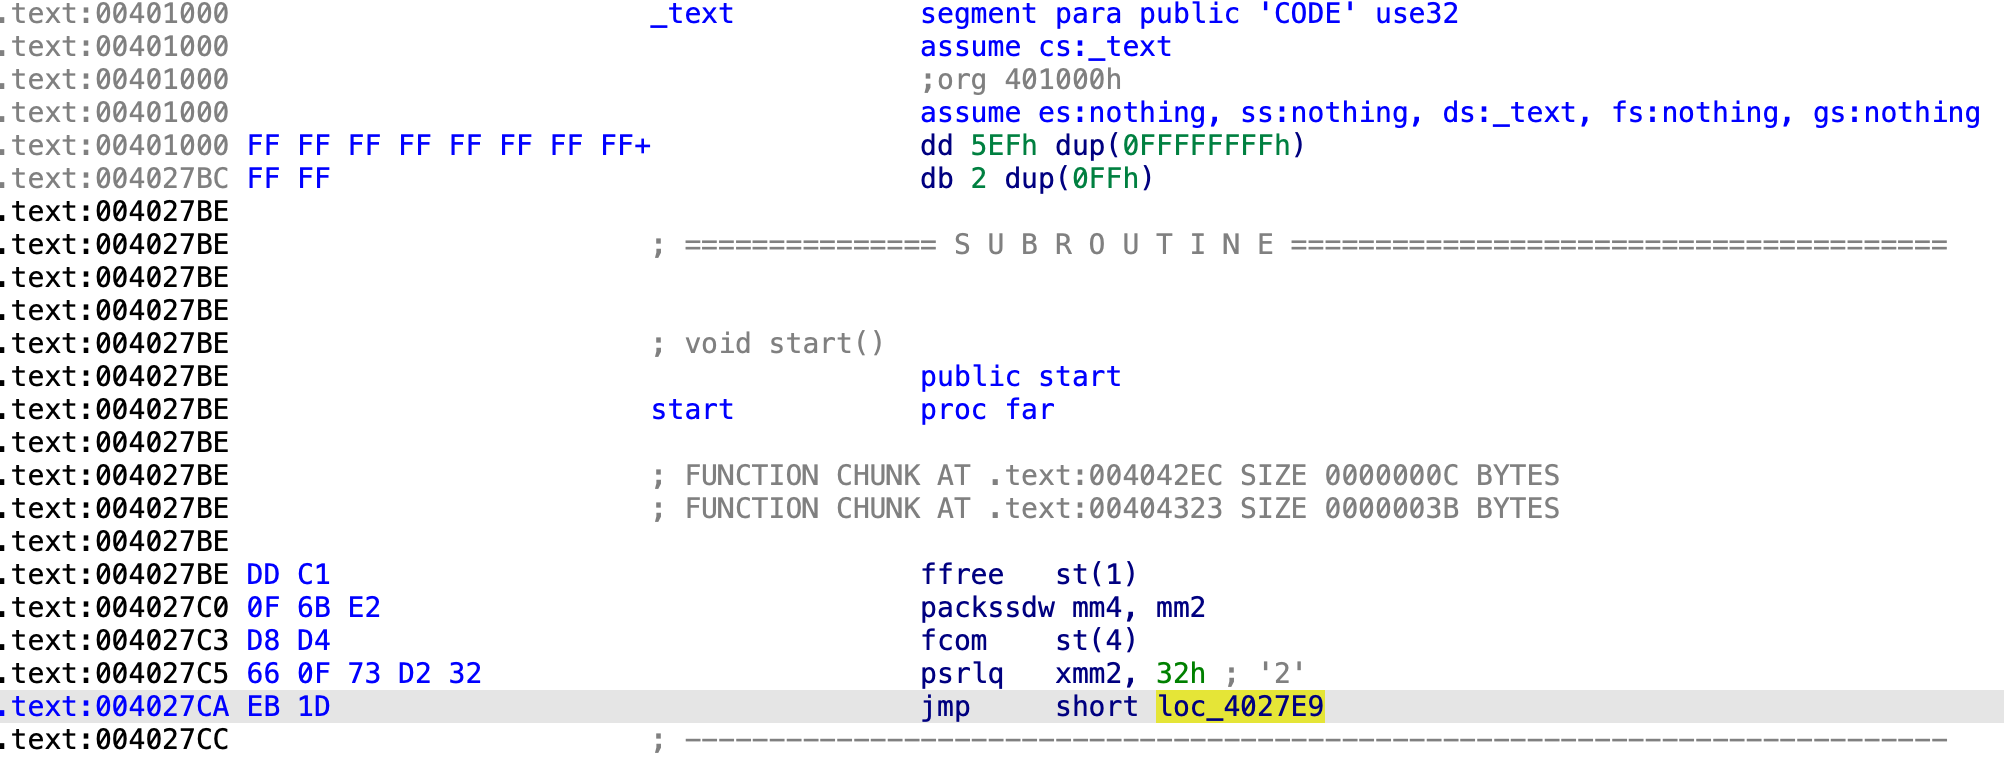 Image 5 is a screenshot of many lines of code showing the generated PE file at entry point in IDA Pro. Highlighted is “loc_4027E9.”